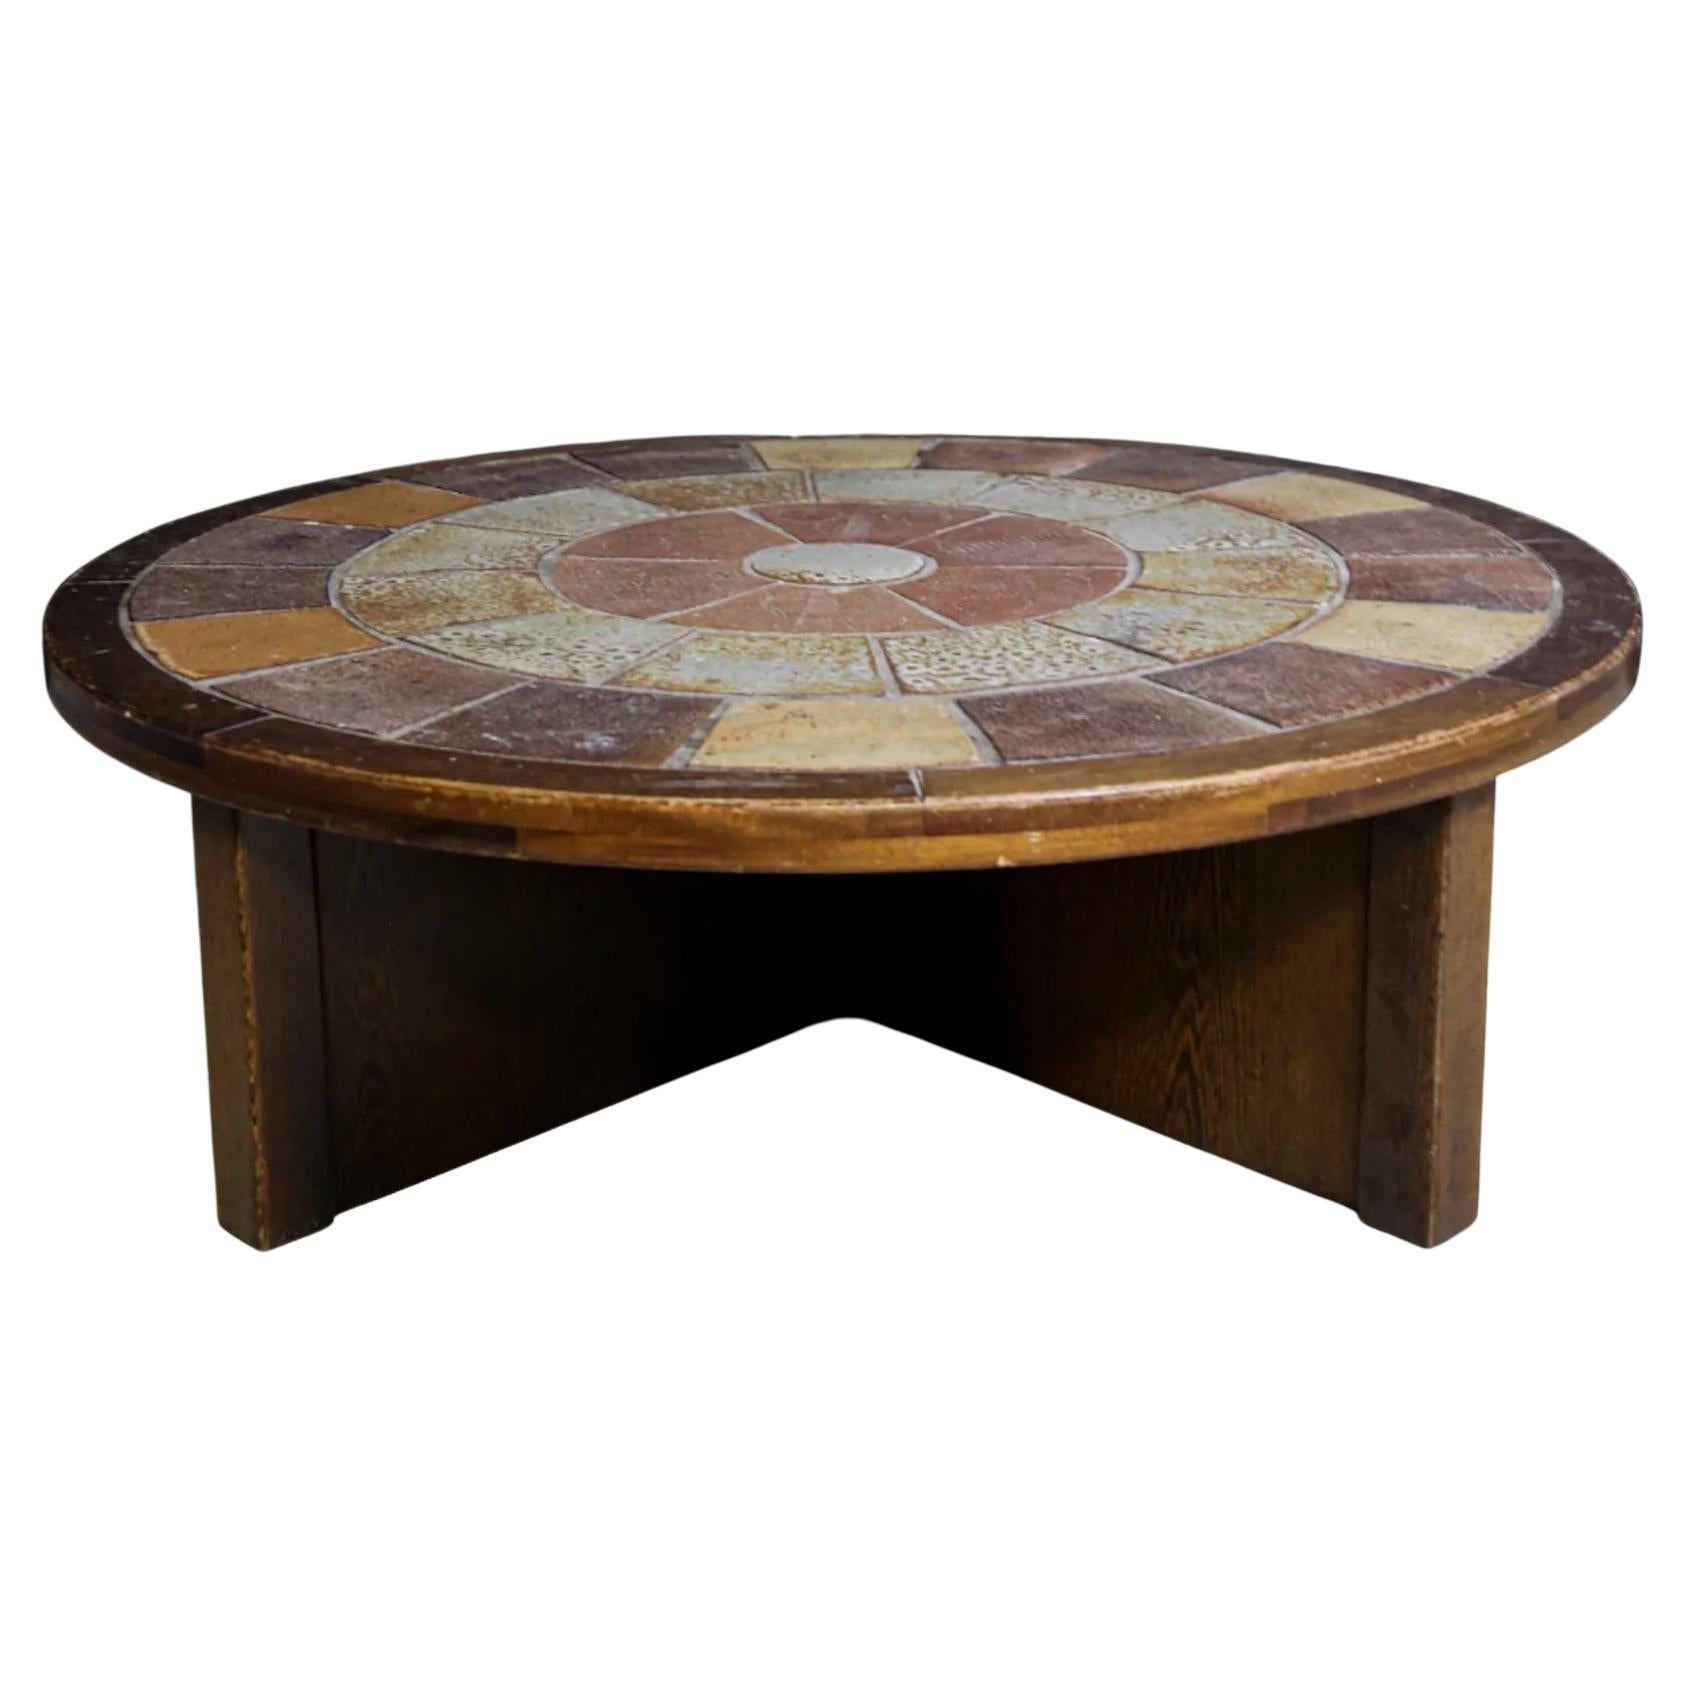 1960's French antique Coffee Table with Tile Inlay